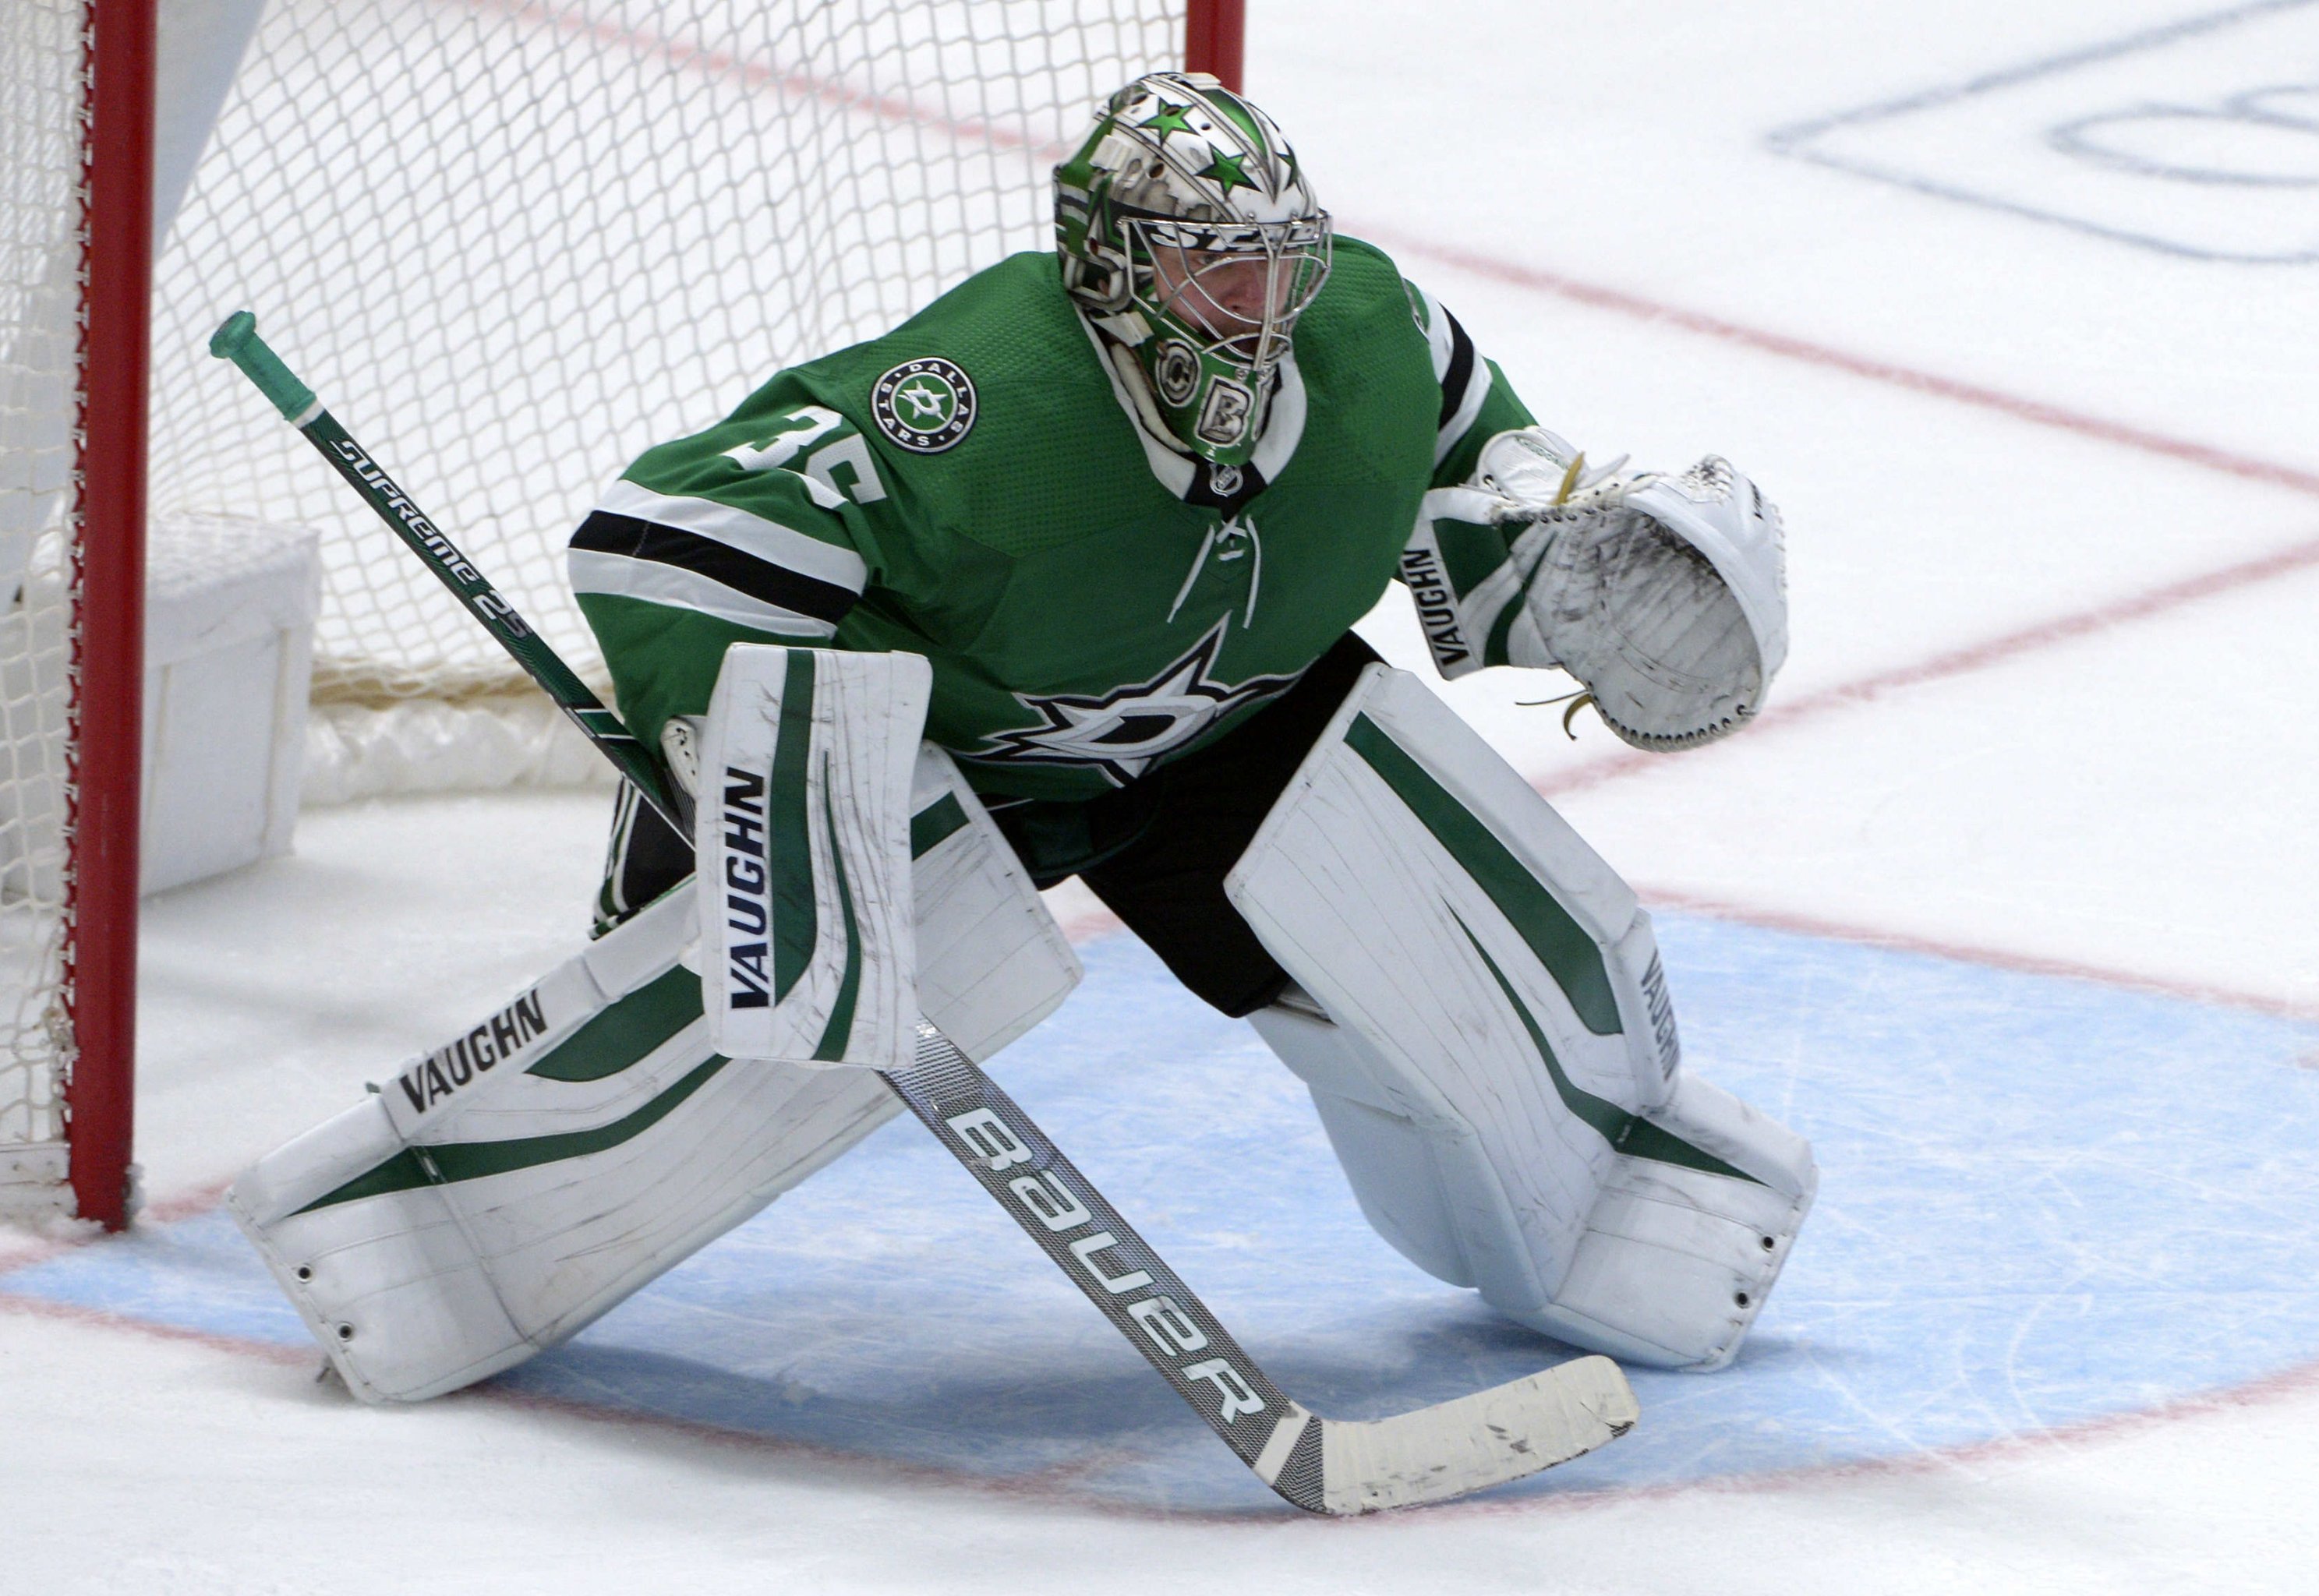 Goalie Ben Bishop to be available in Seattle expansion draft